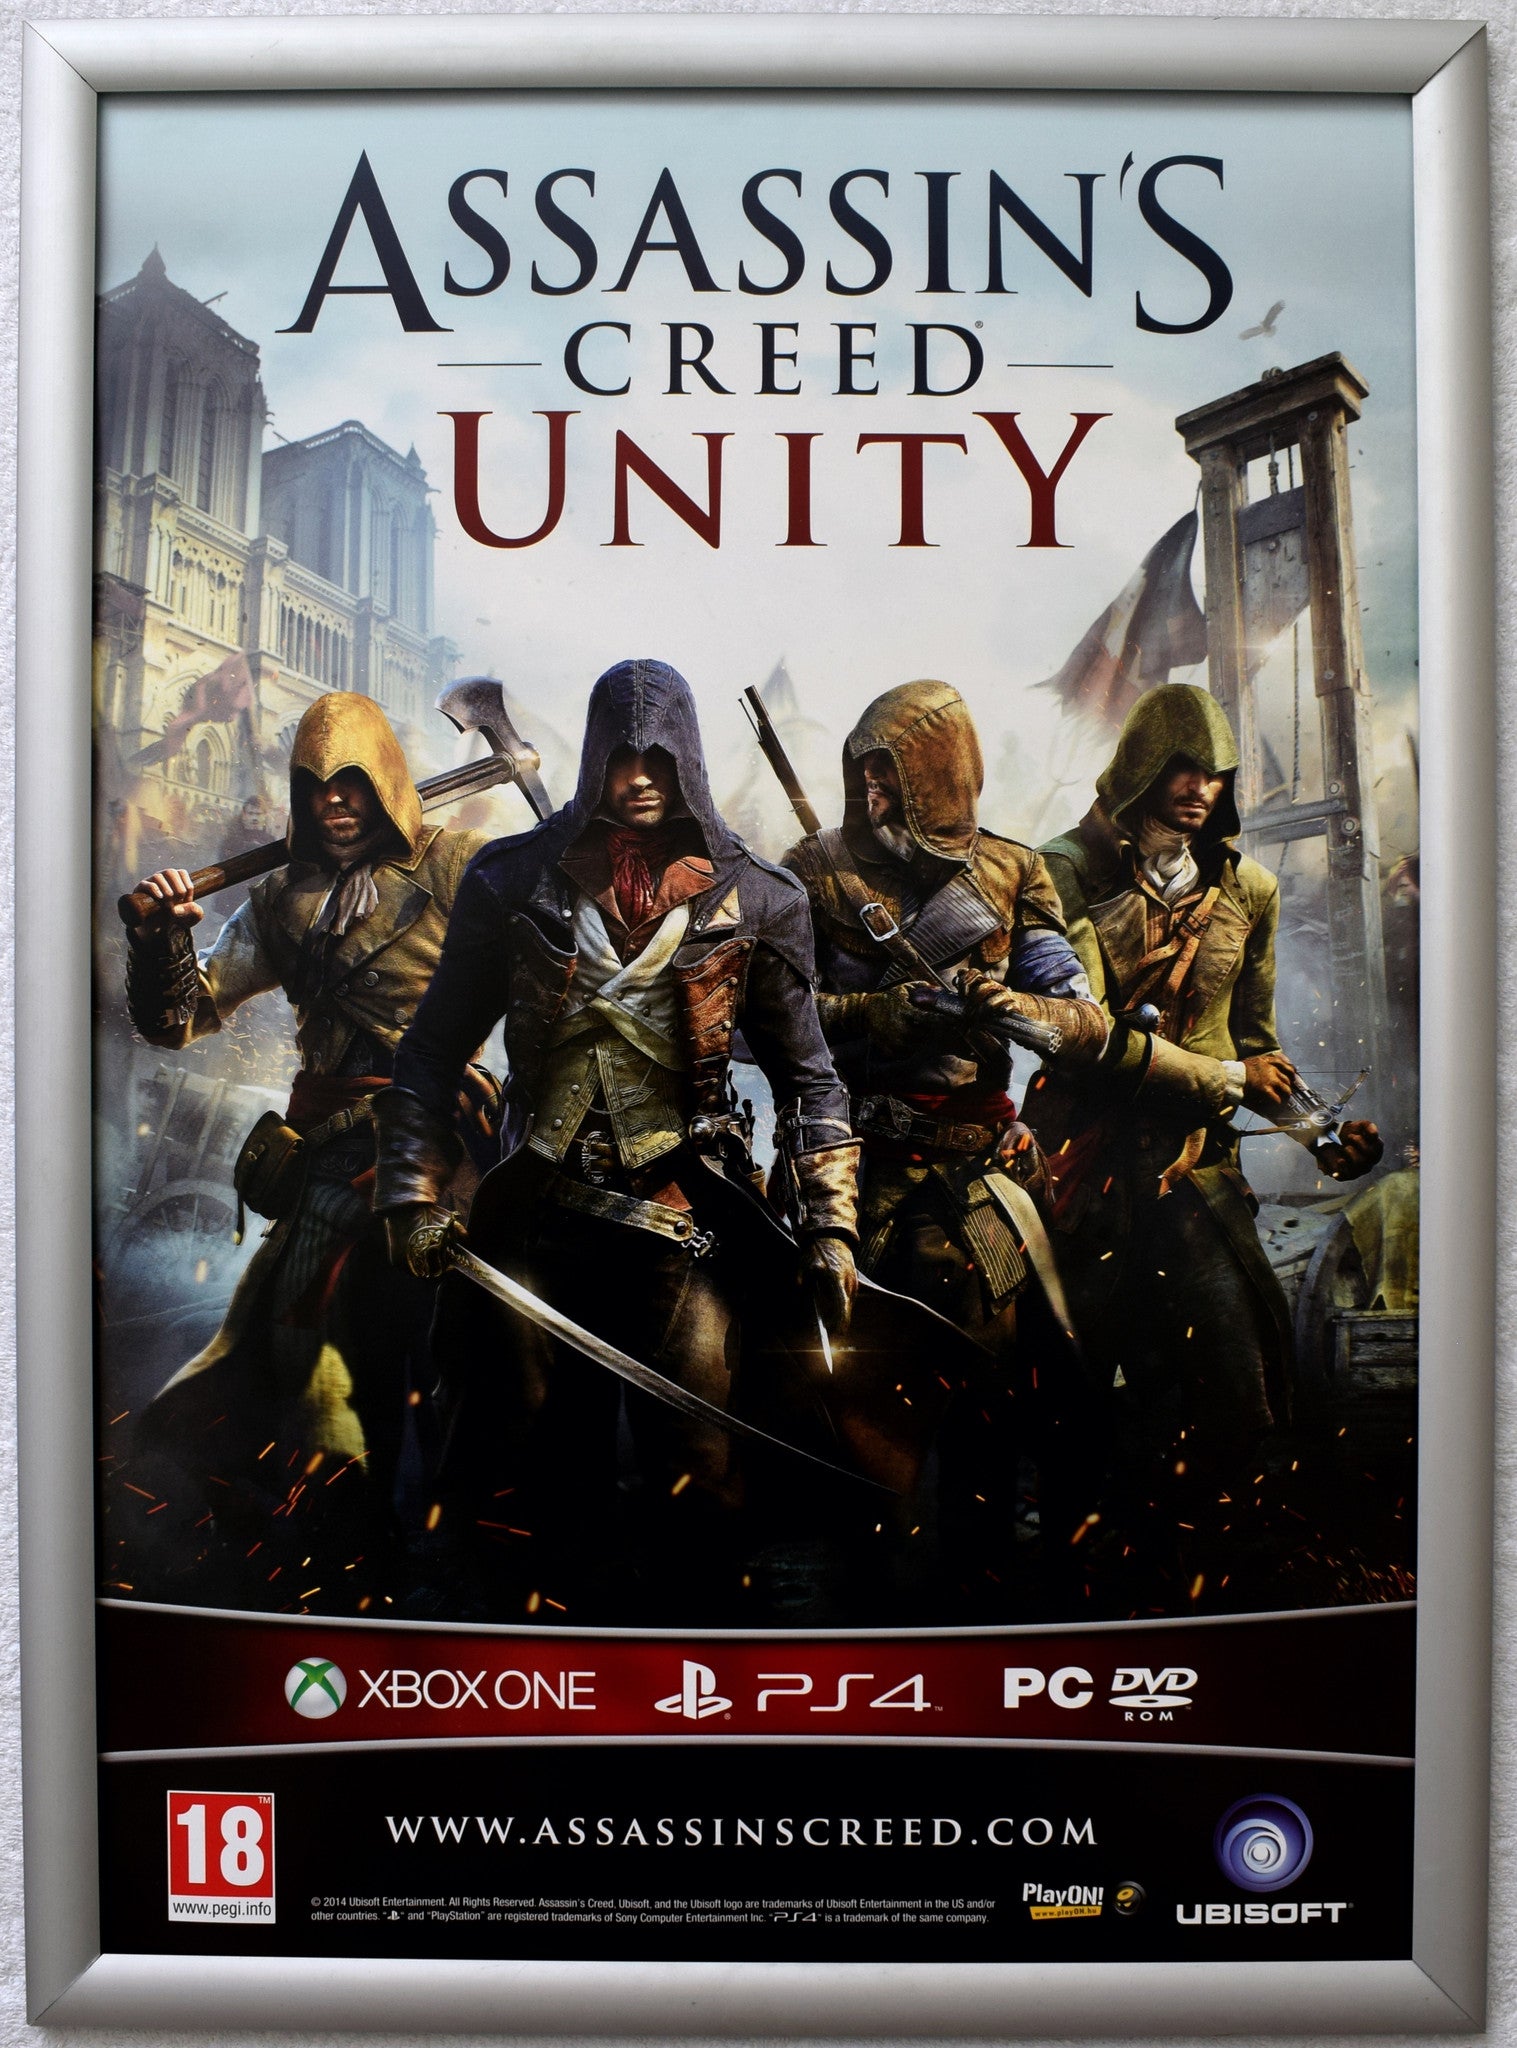 Assassin's Creed Unity (A2) Promotional Poster #3